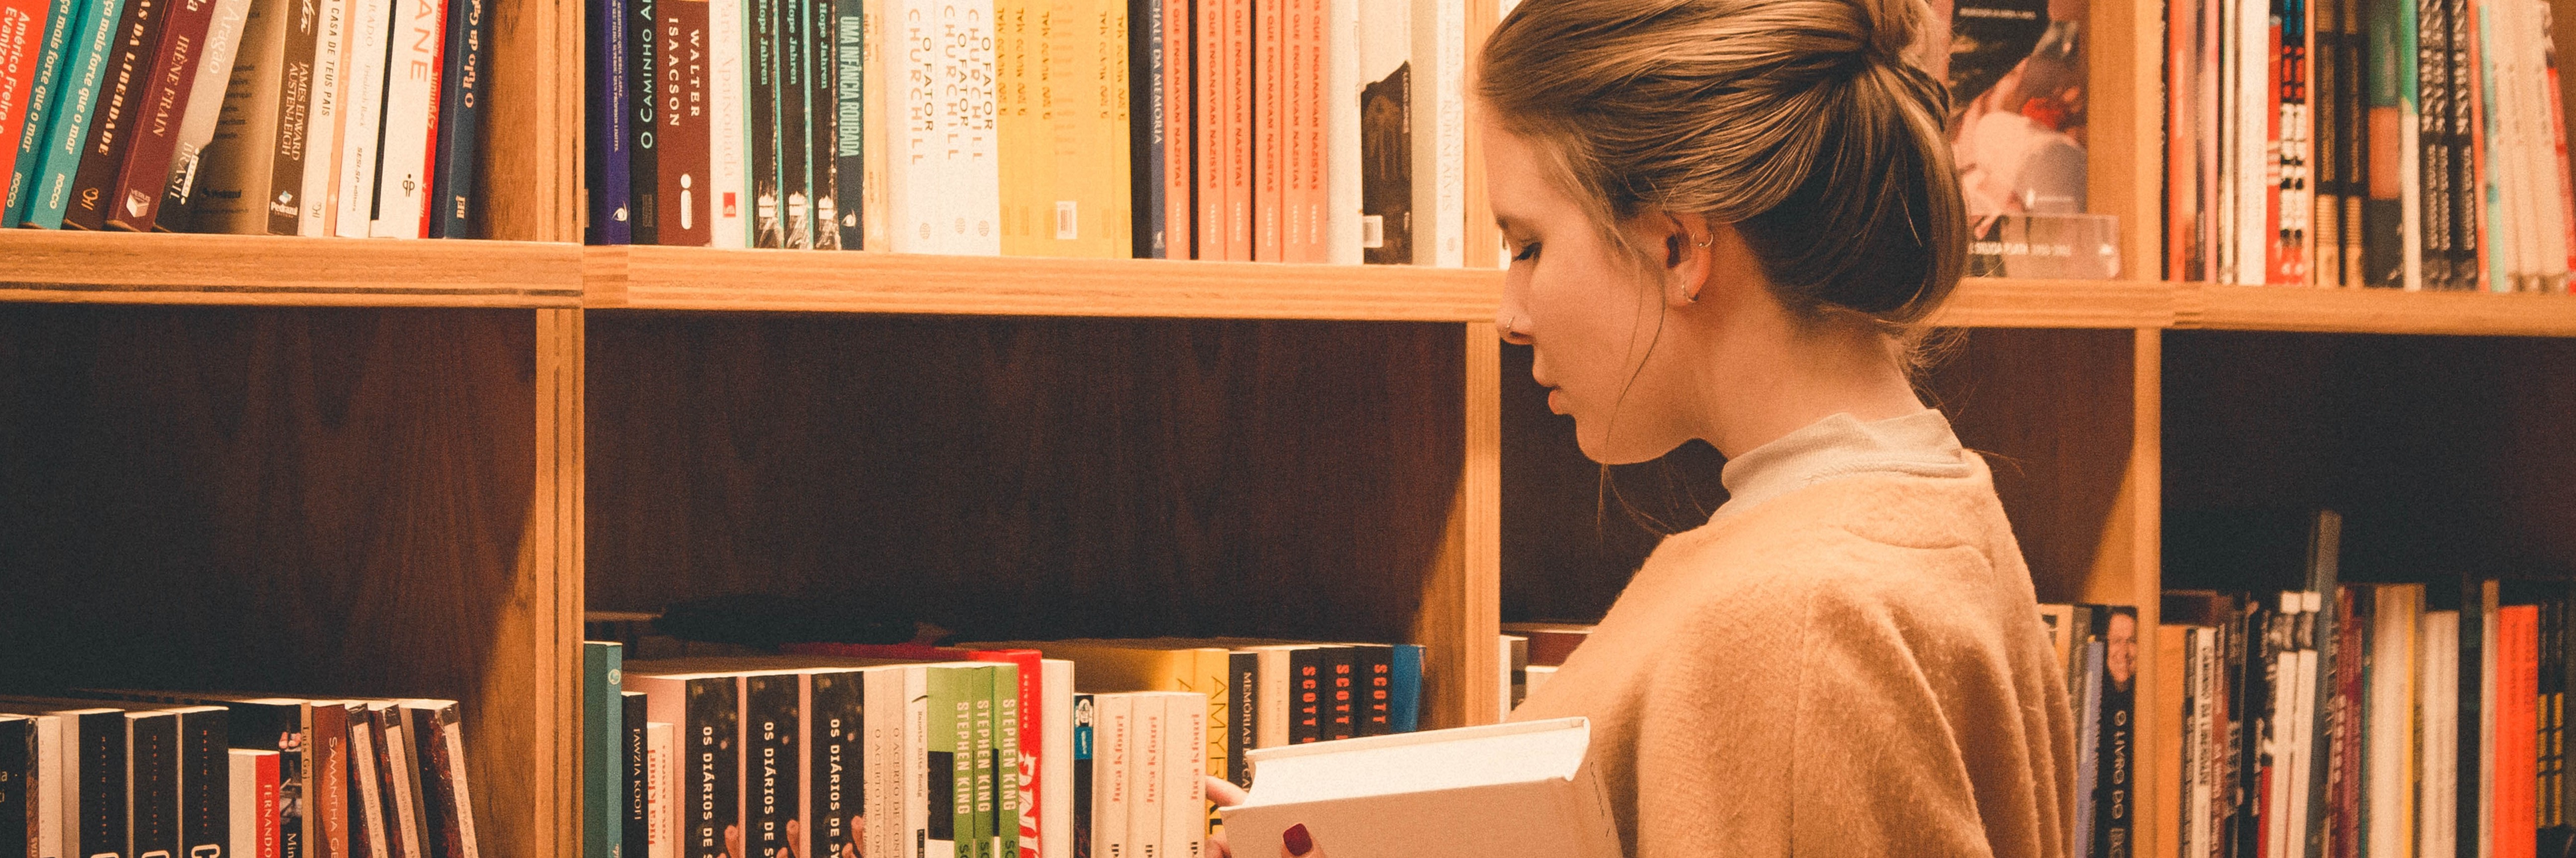 A woman holding a book, looking at a library shelf full of books. Photo by Eliabe Costa on Unsplash